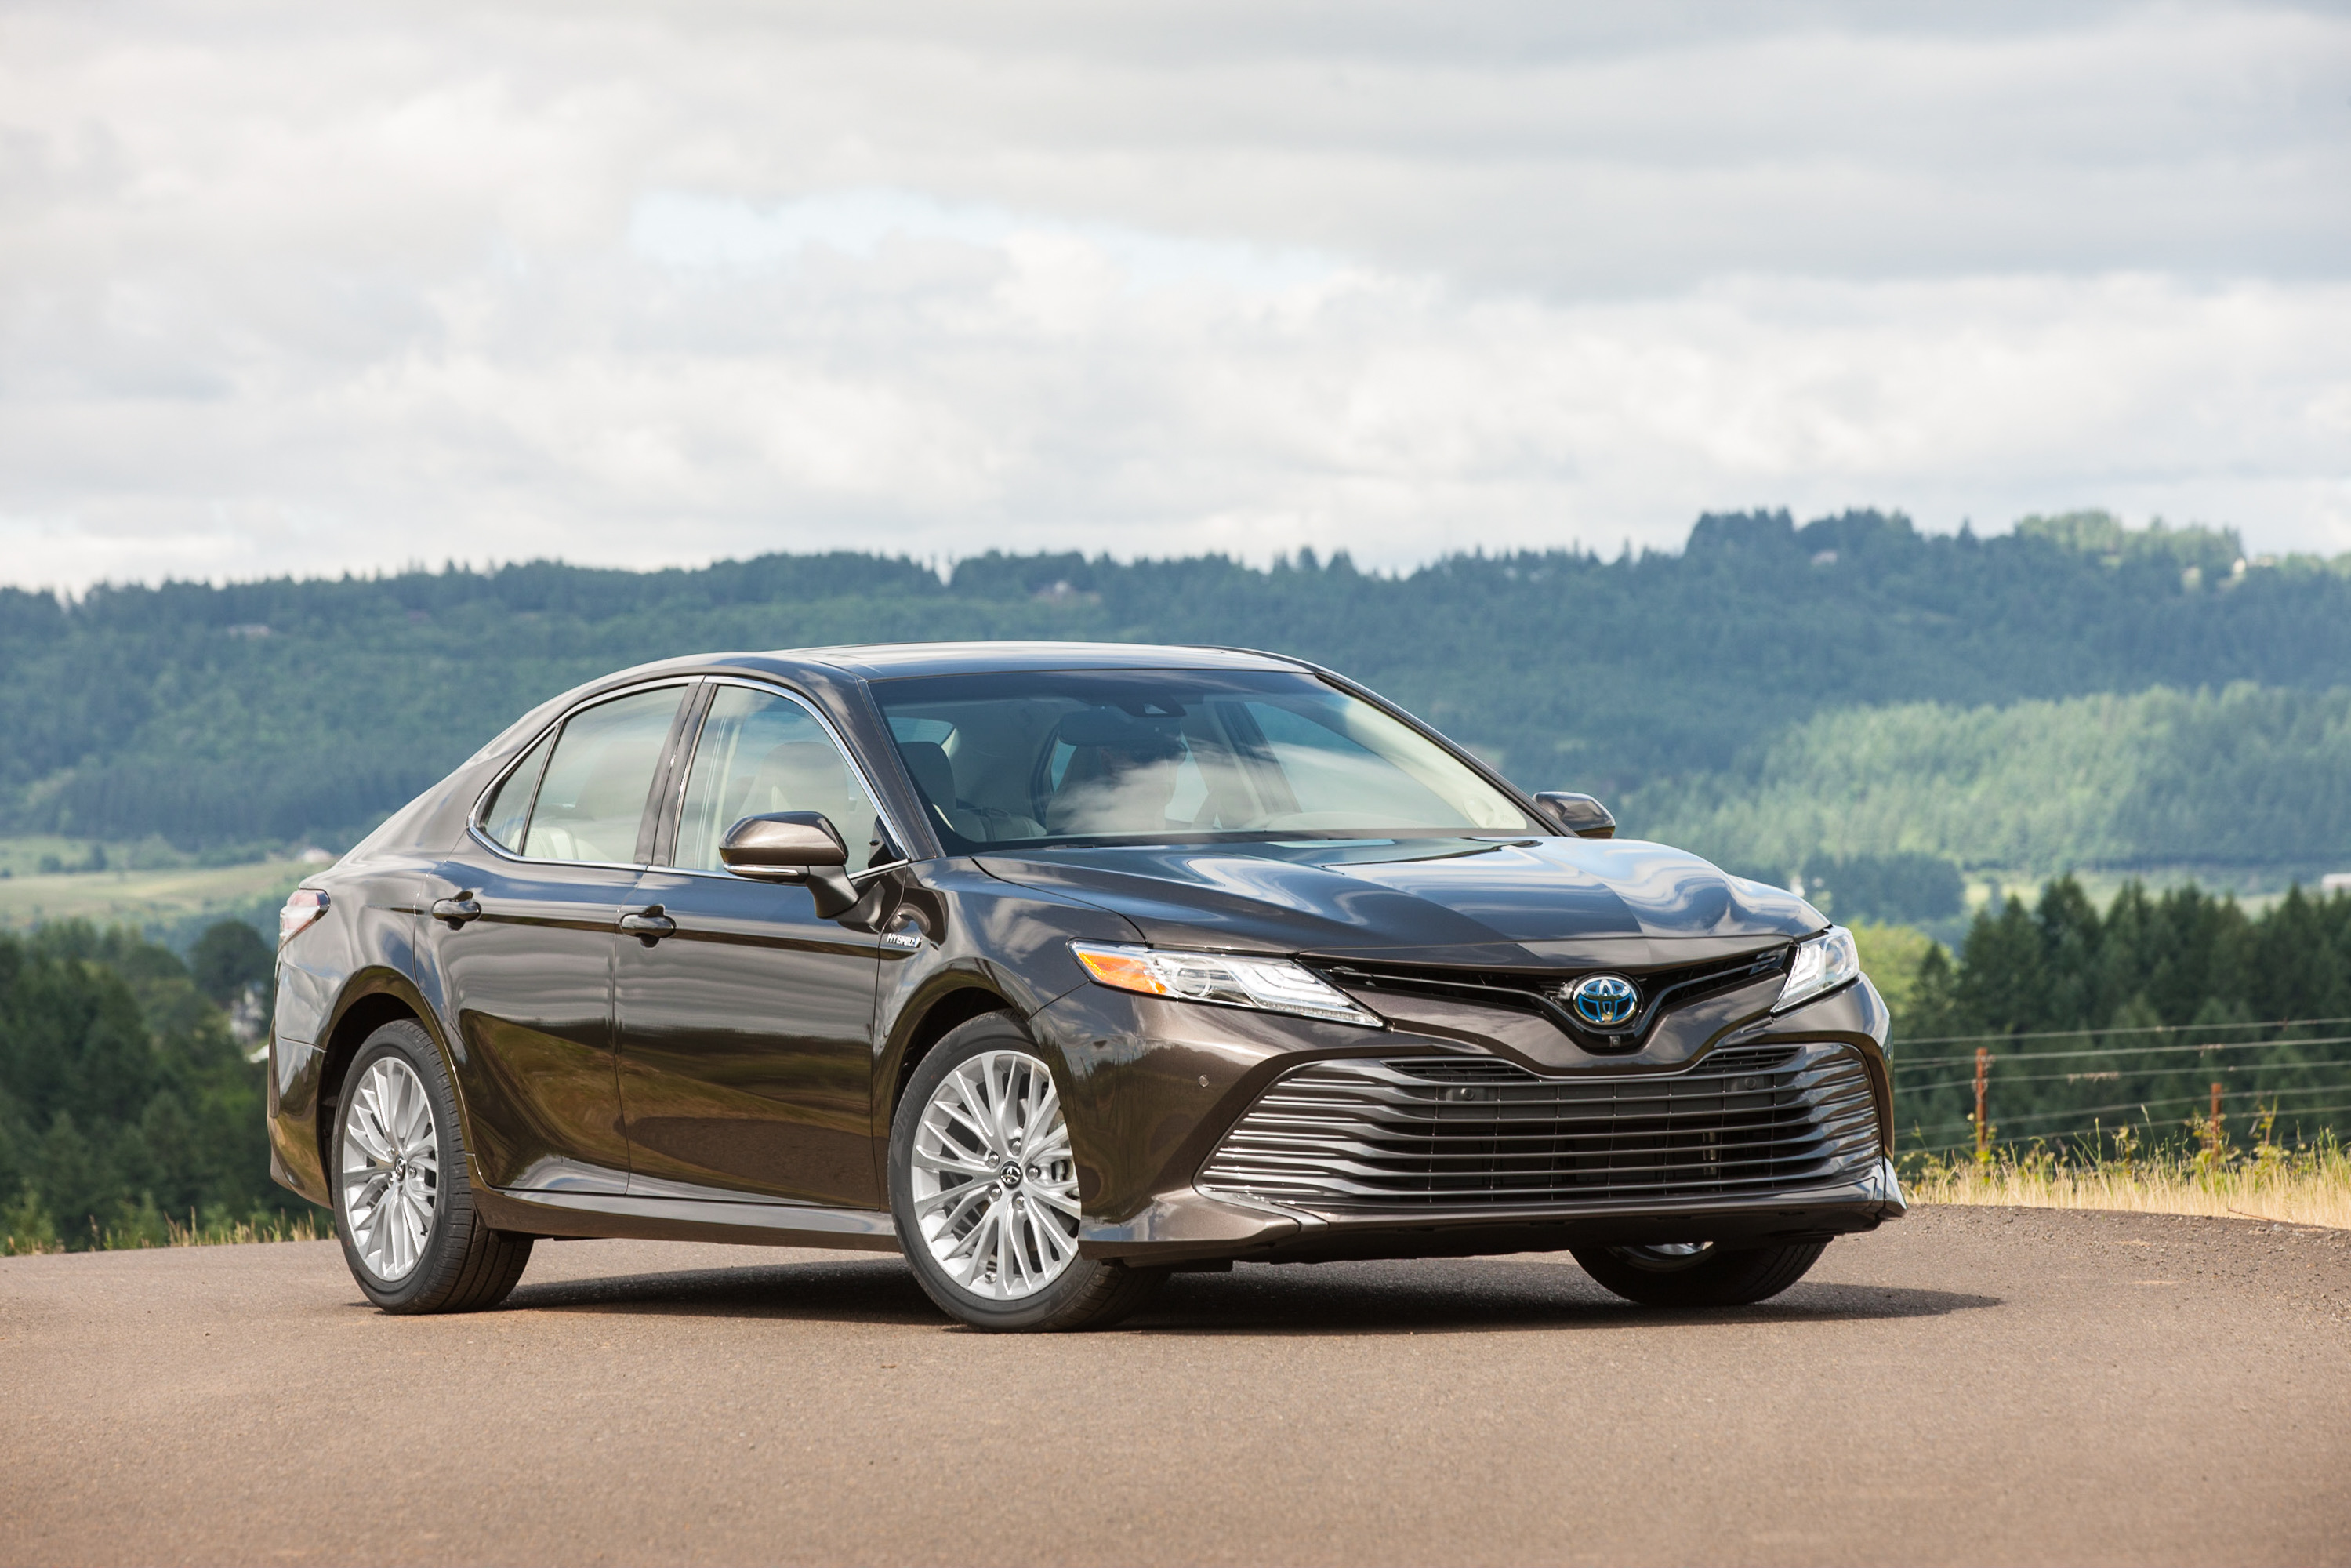 New Camry isn’t sexy, but it is attractively practical | ClassicCars.com